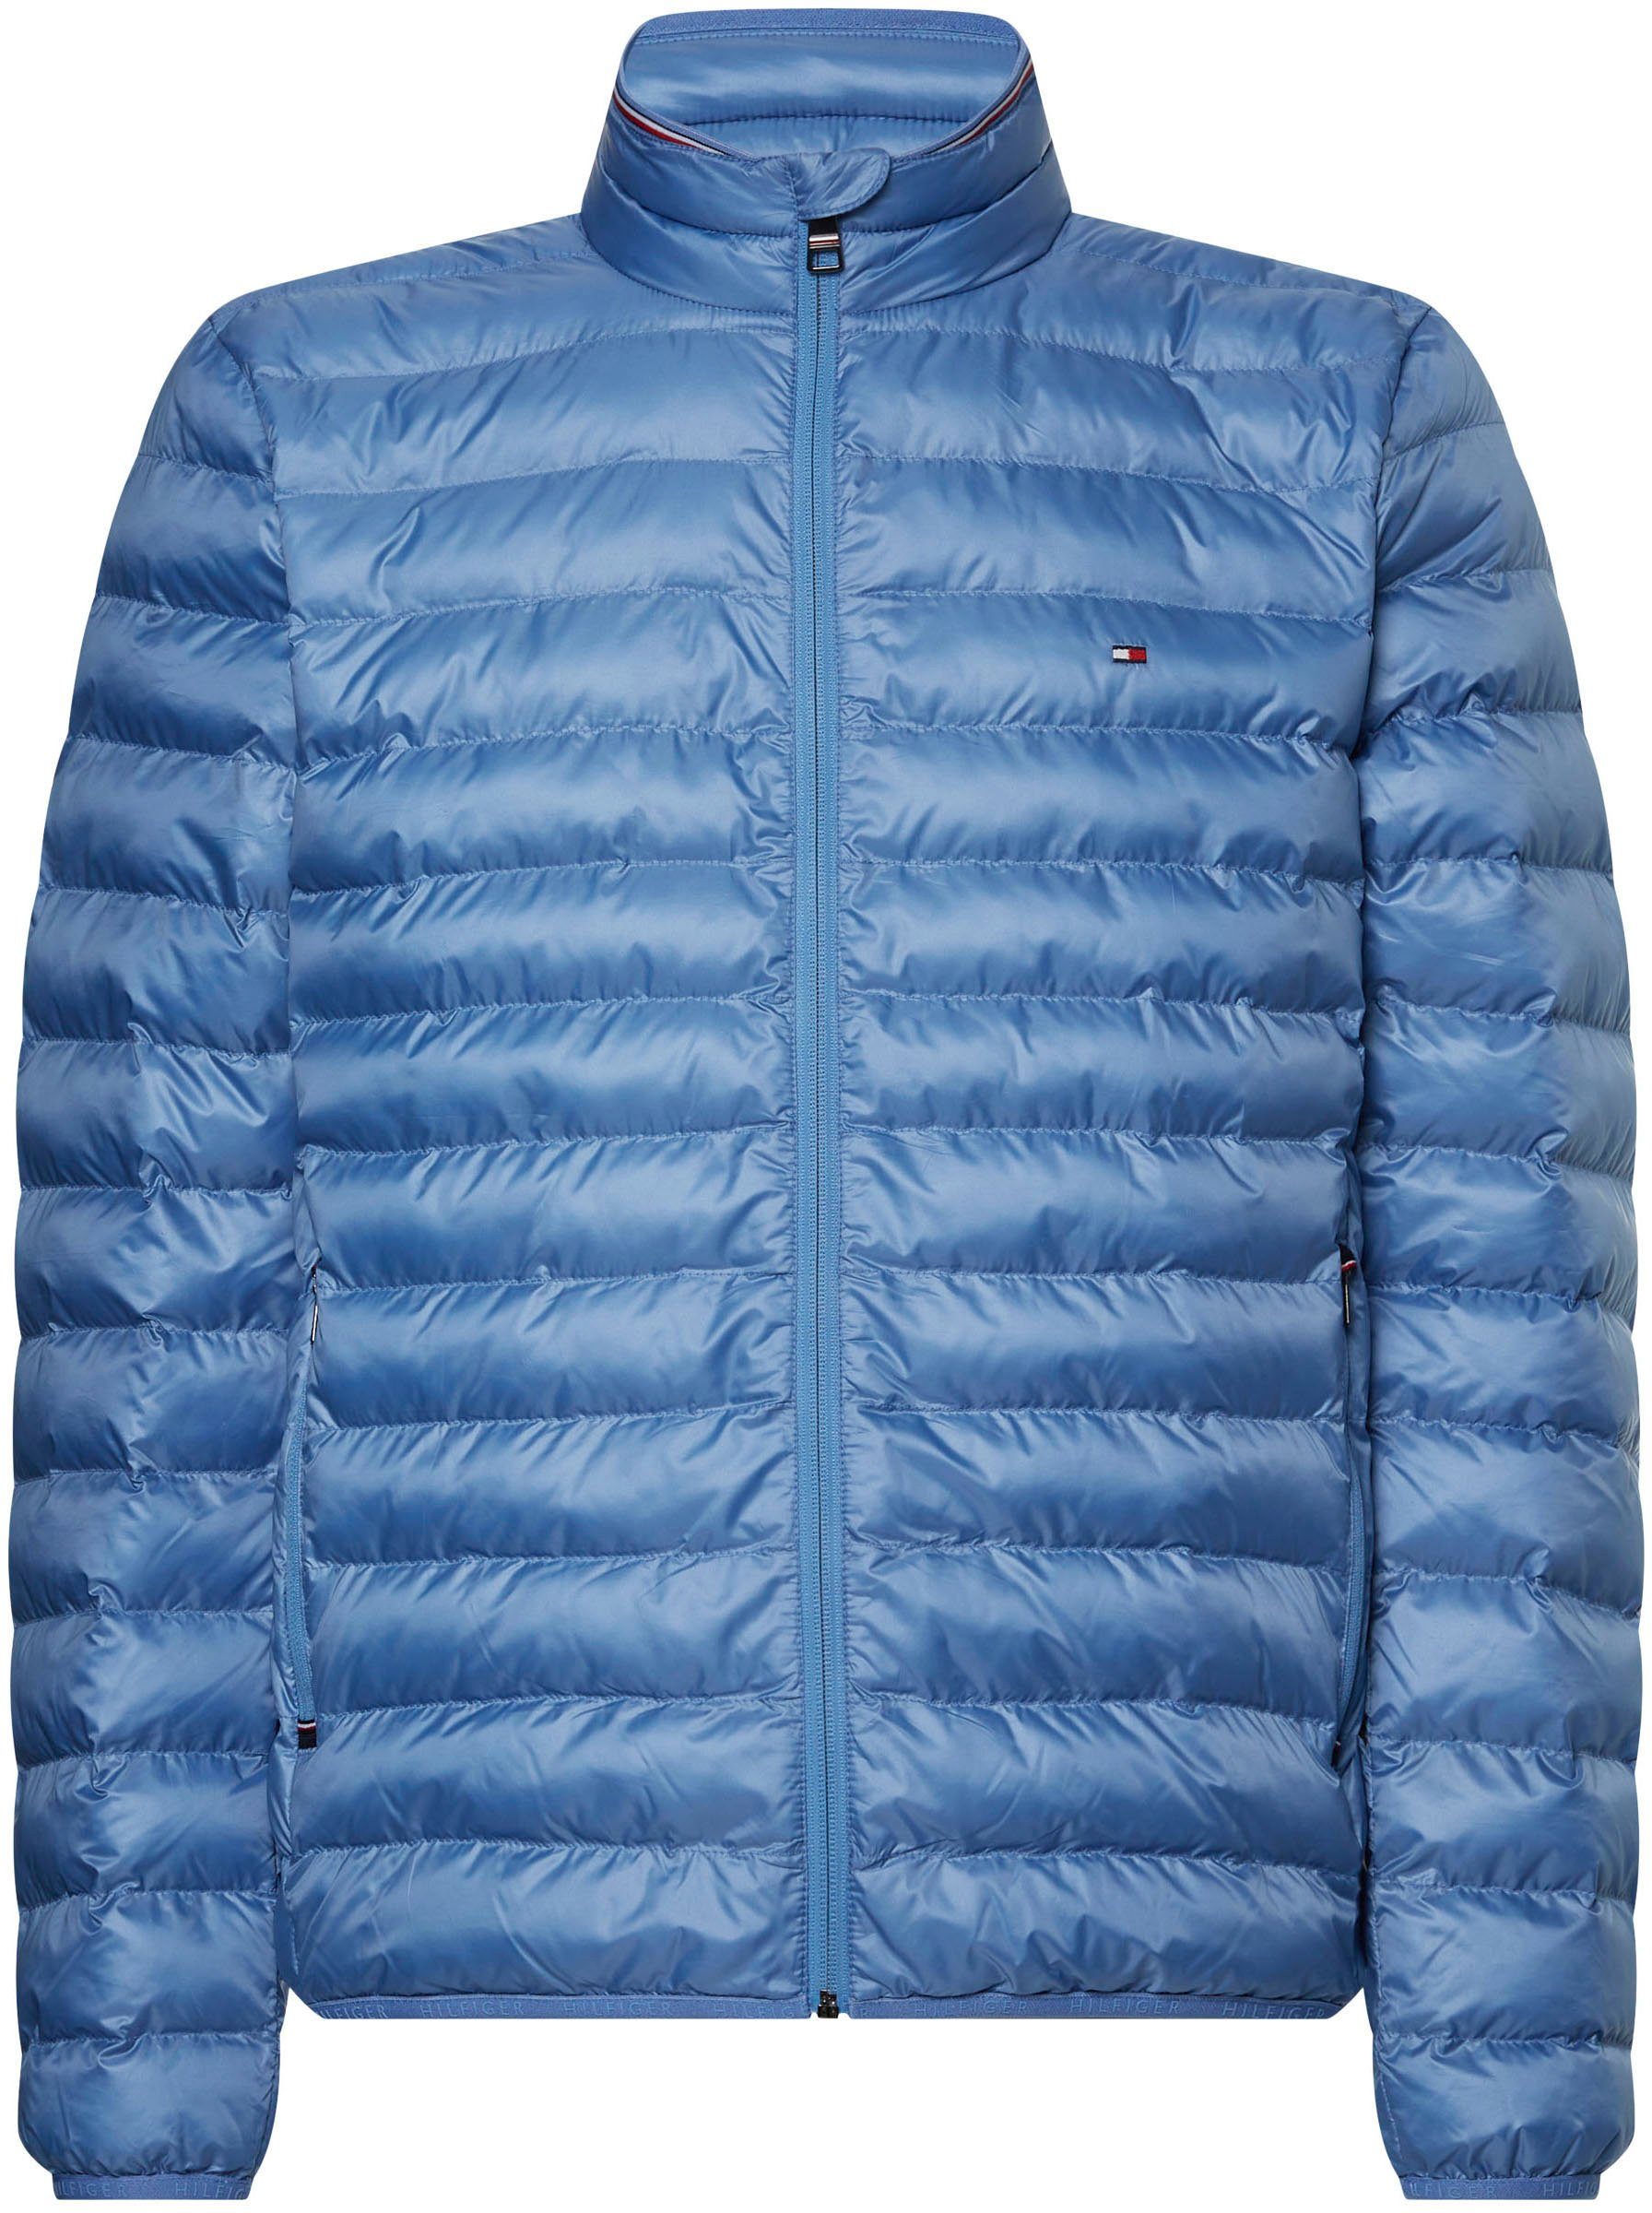 Steppjacke Logostickerei Tommy mit Tommy Hilfiger Hilfiger SkyCloud RECYCLED PACKABLE JACKET